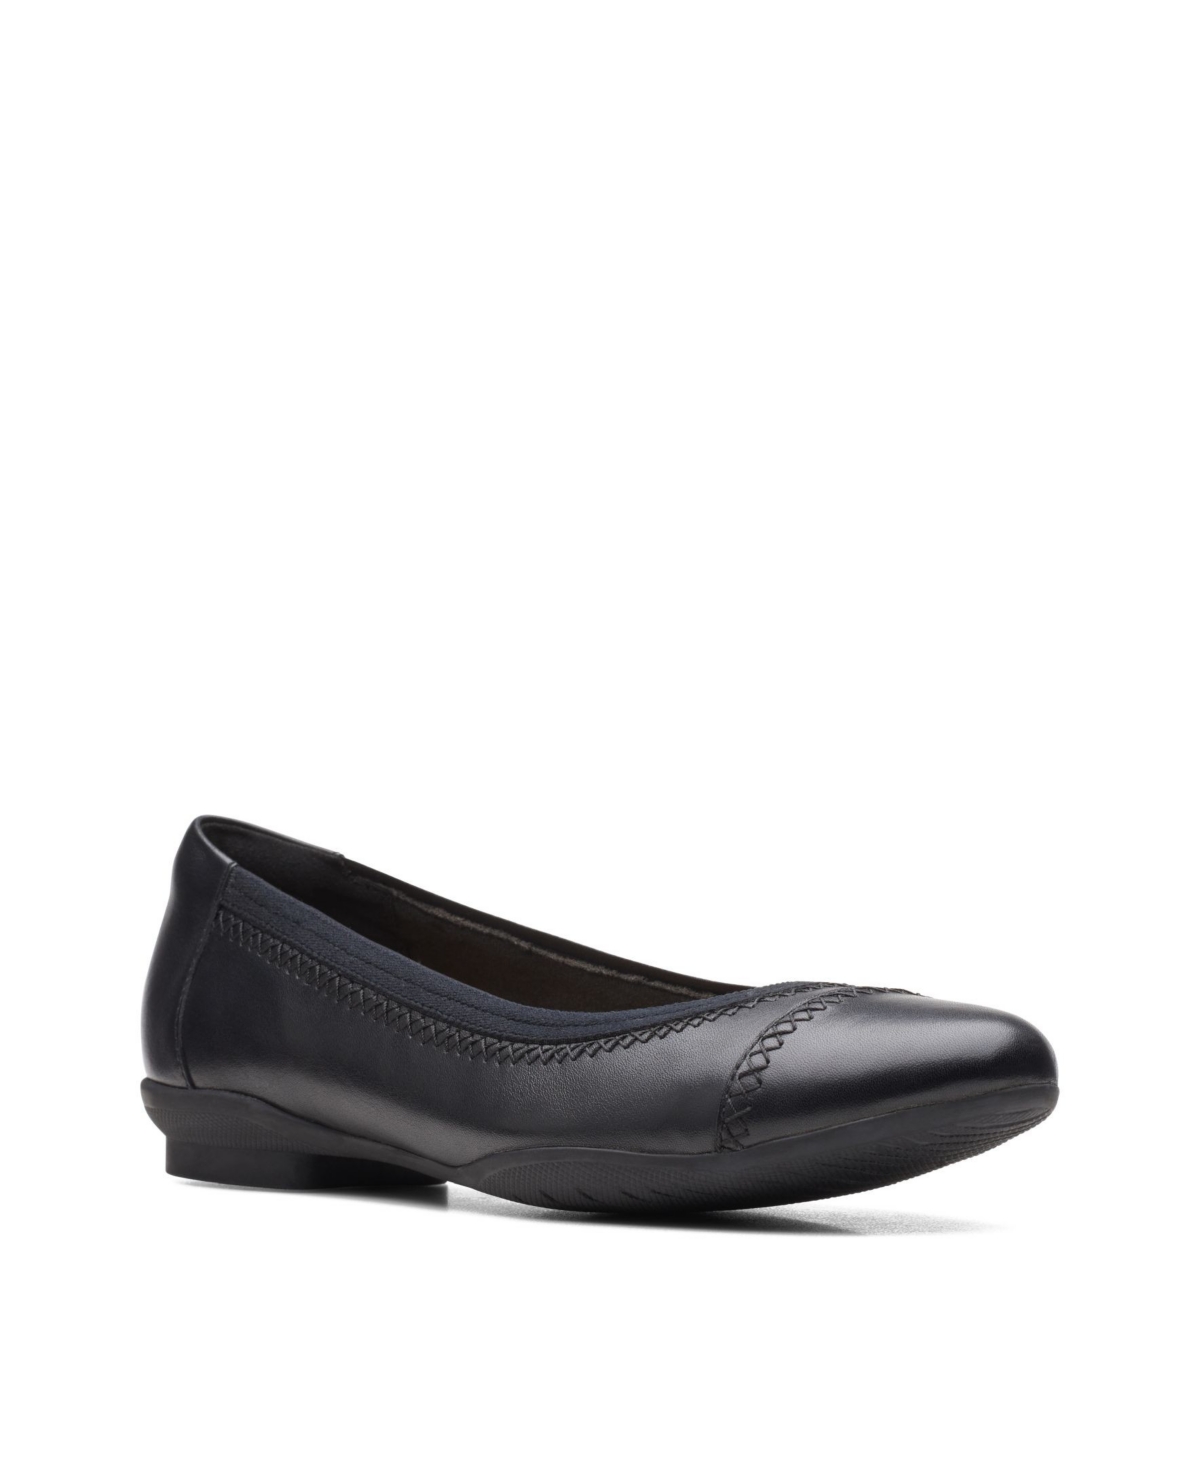 CLARKS WOMEN'S COLLECTION SARA BAY FLATS WOMEN'S SHOES